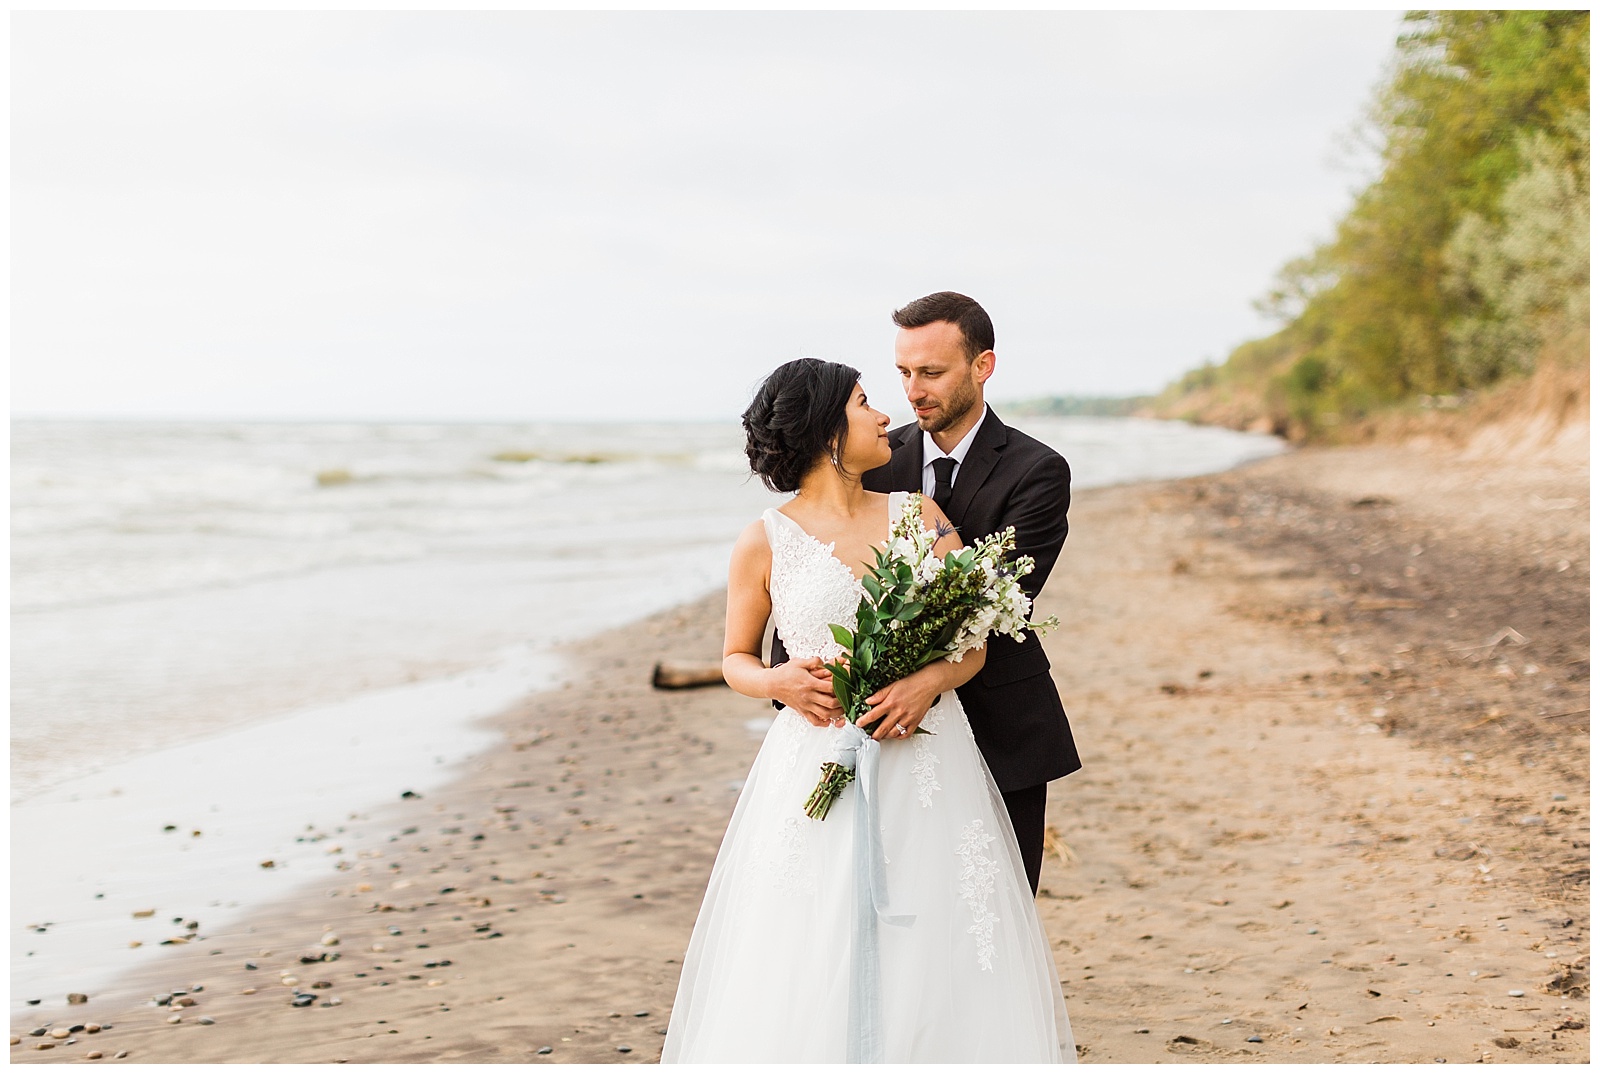 Bride and groom embrace during Northern Michigan beach wedding.